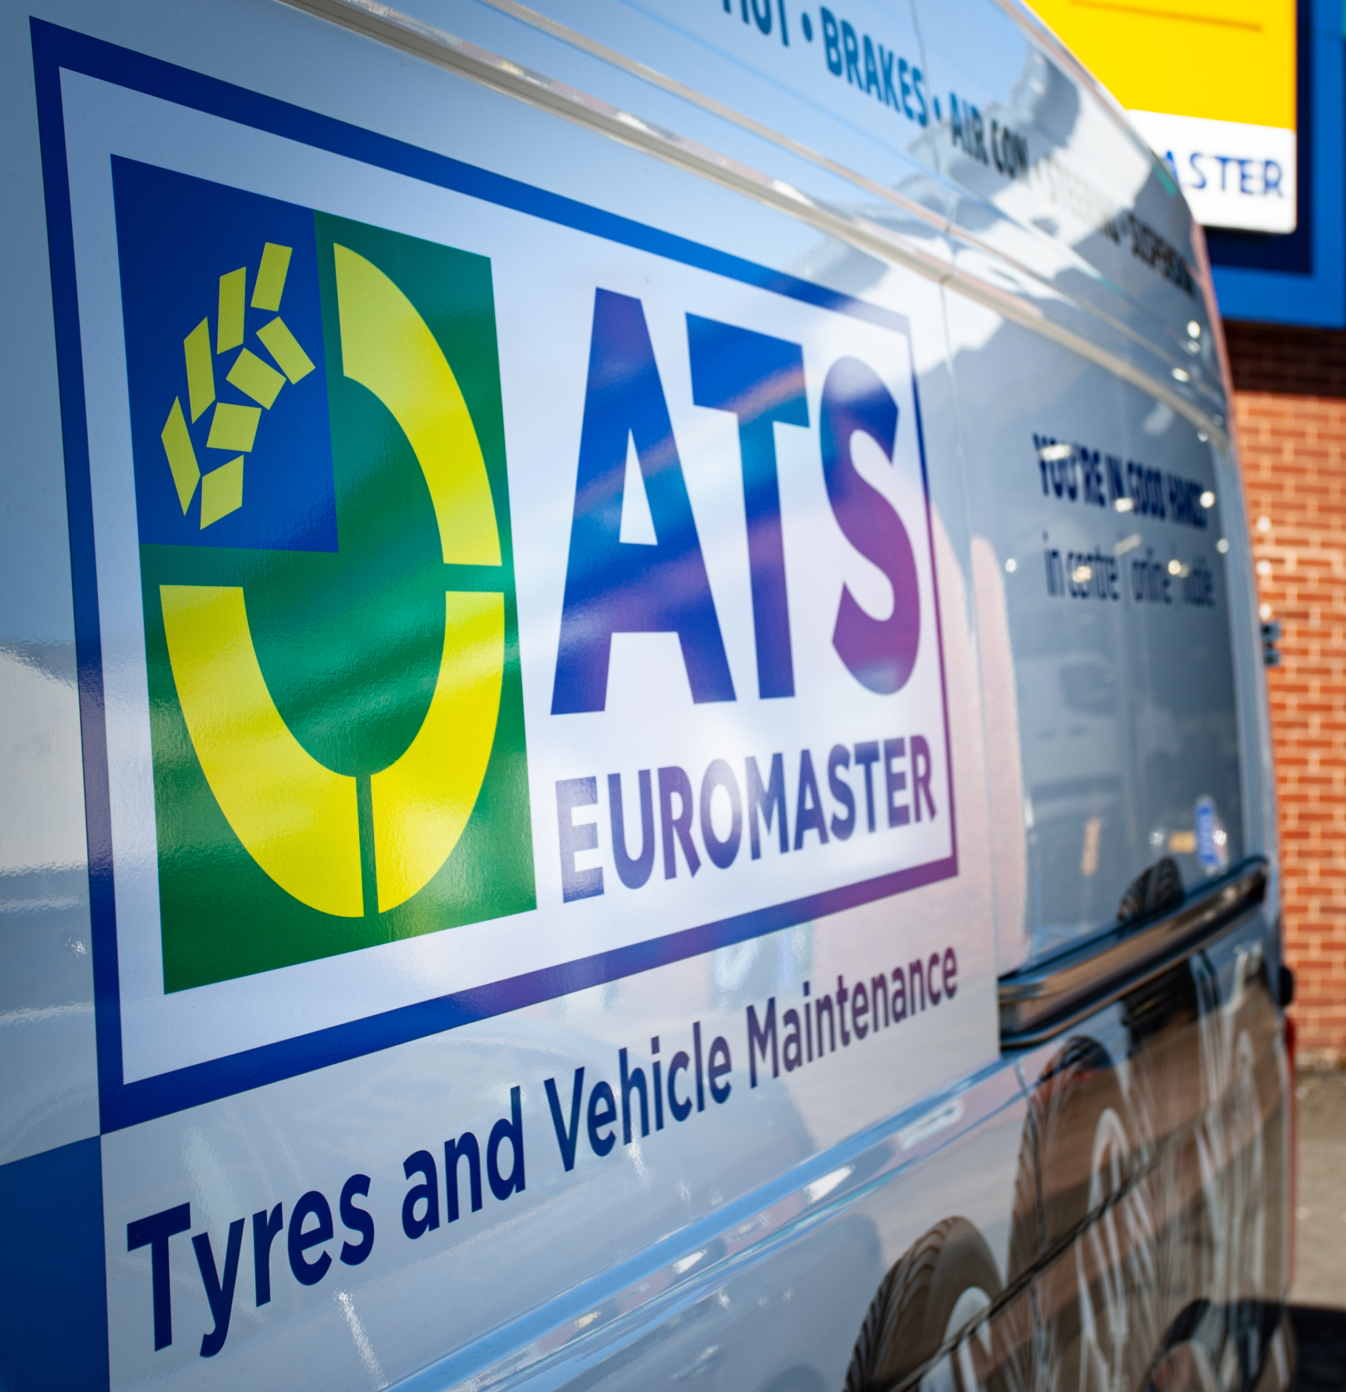 Mobile tyre service demand to rise 25% in 2023 – ATS Euromaster